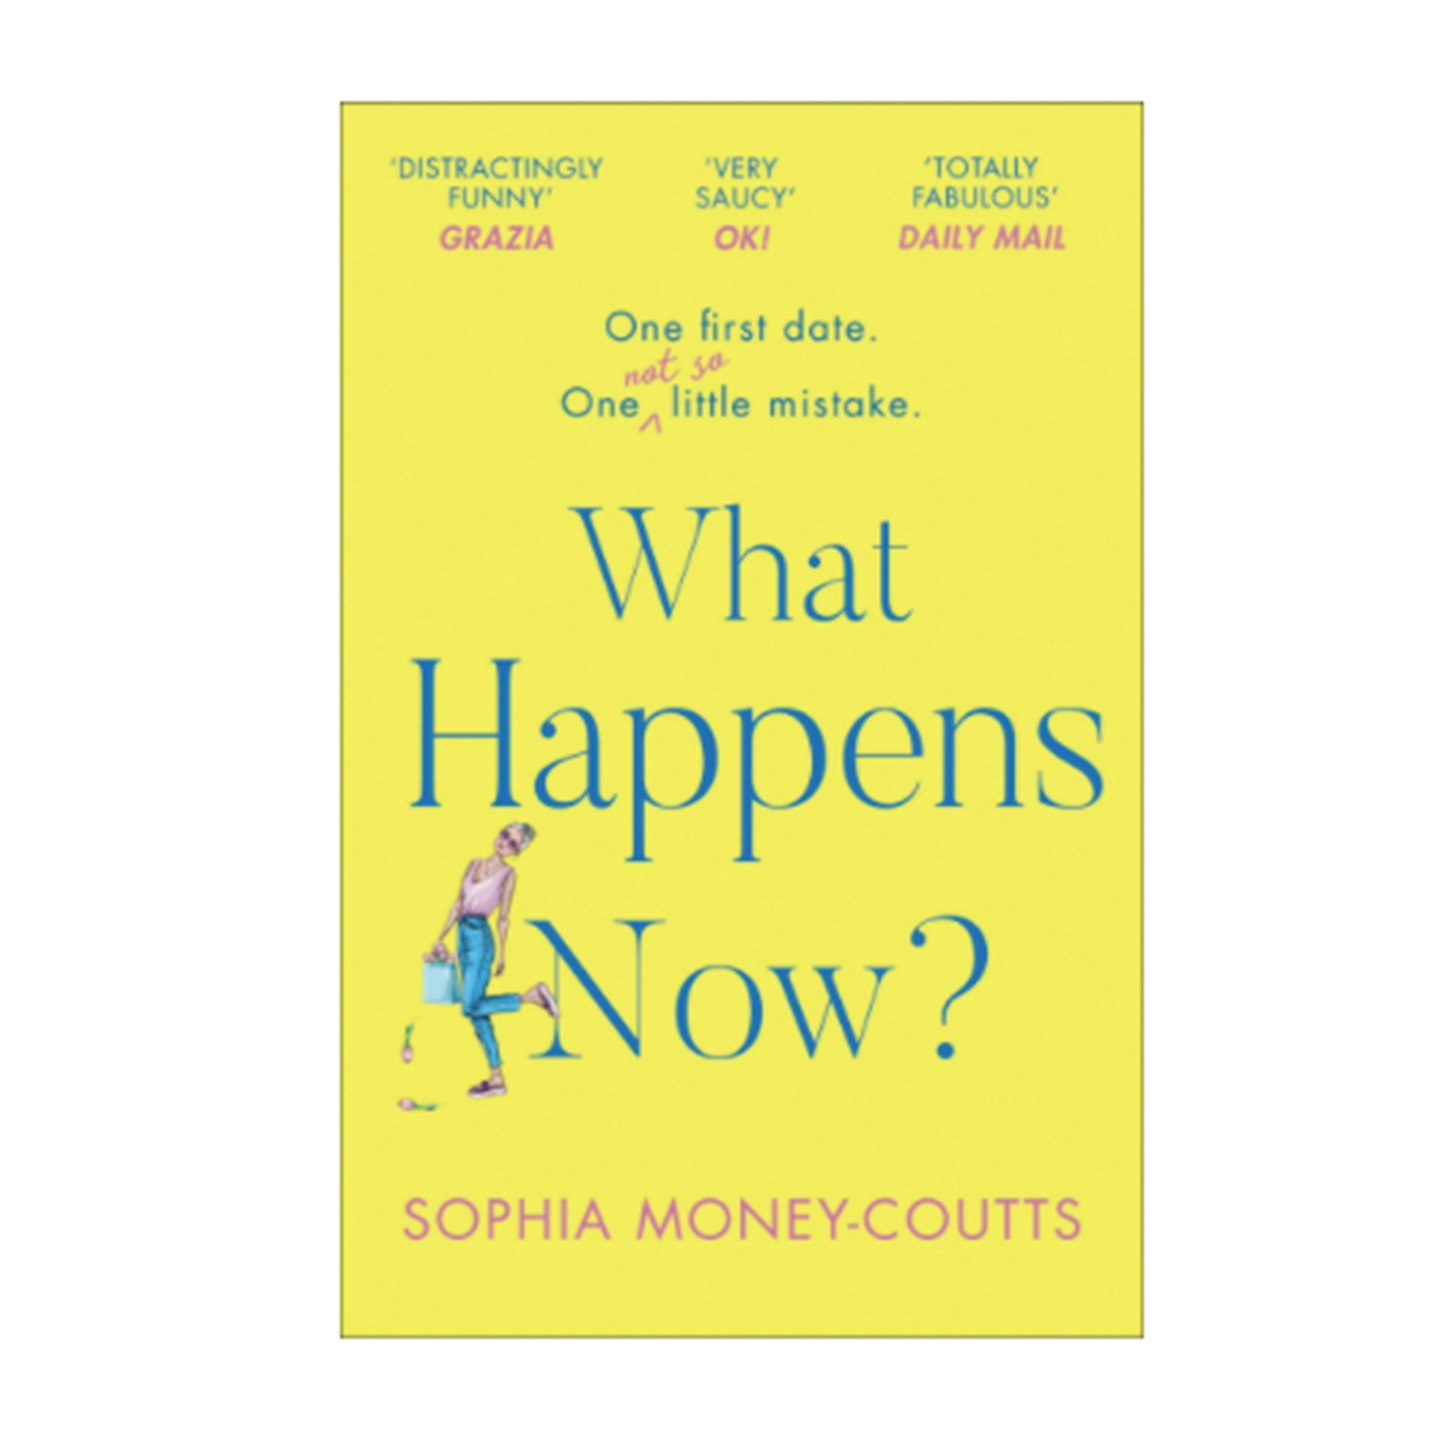 What Happens Now? by Sophia Money-Coutts